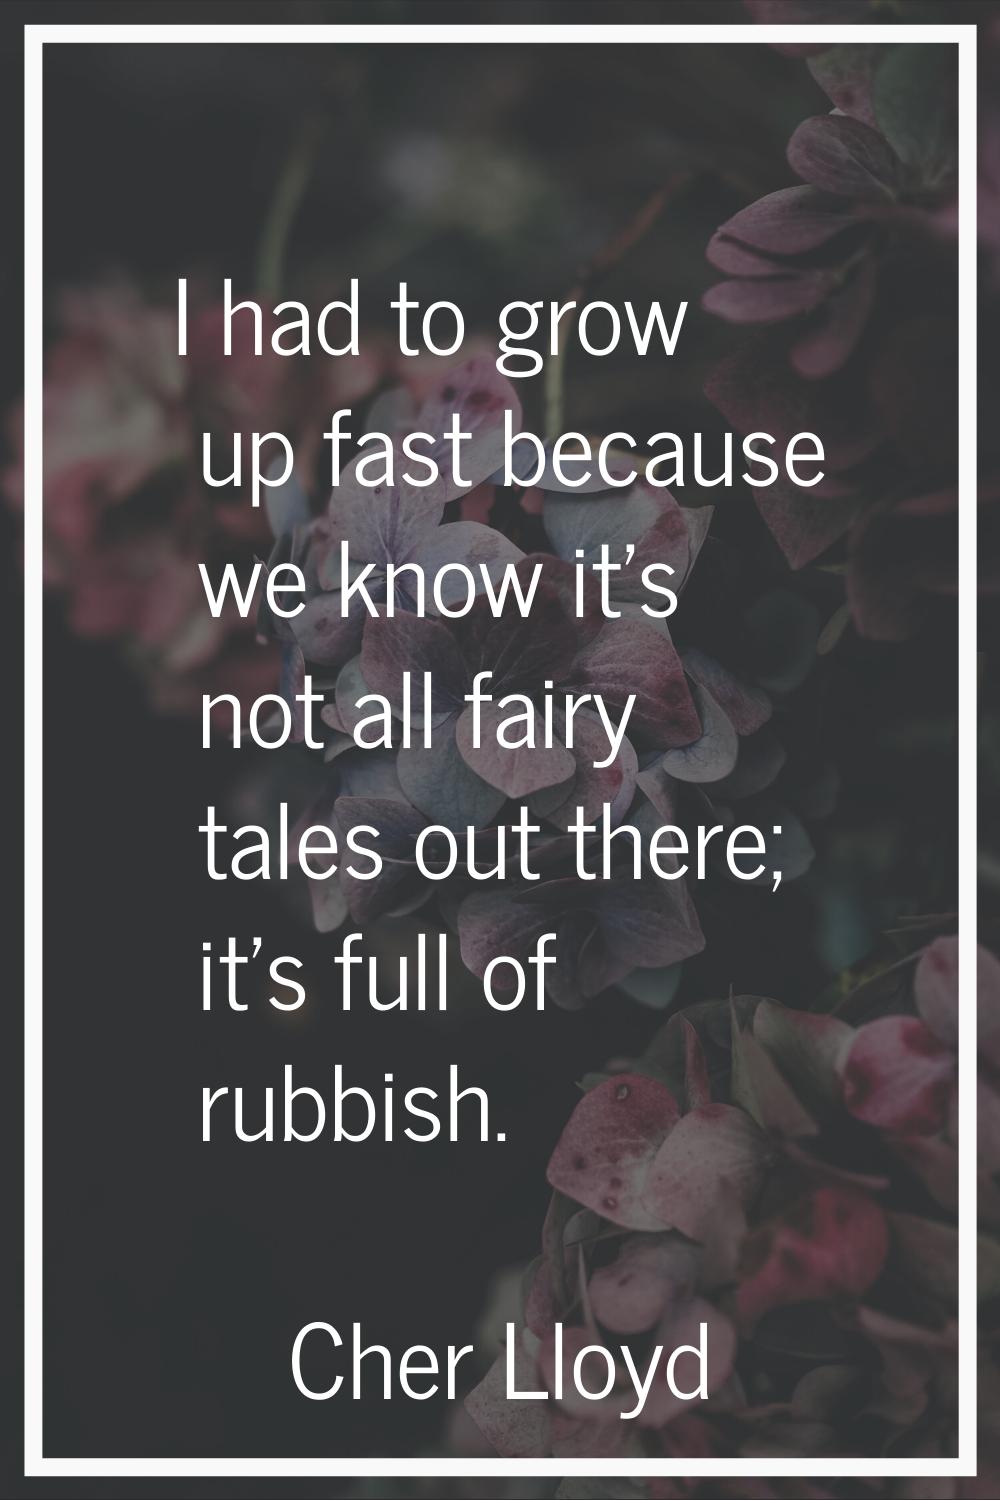 I had to grow up fast because we know it's not all fairy tales out there; it's full of rubbish.